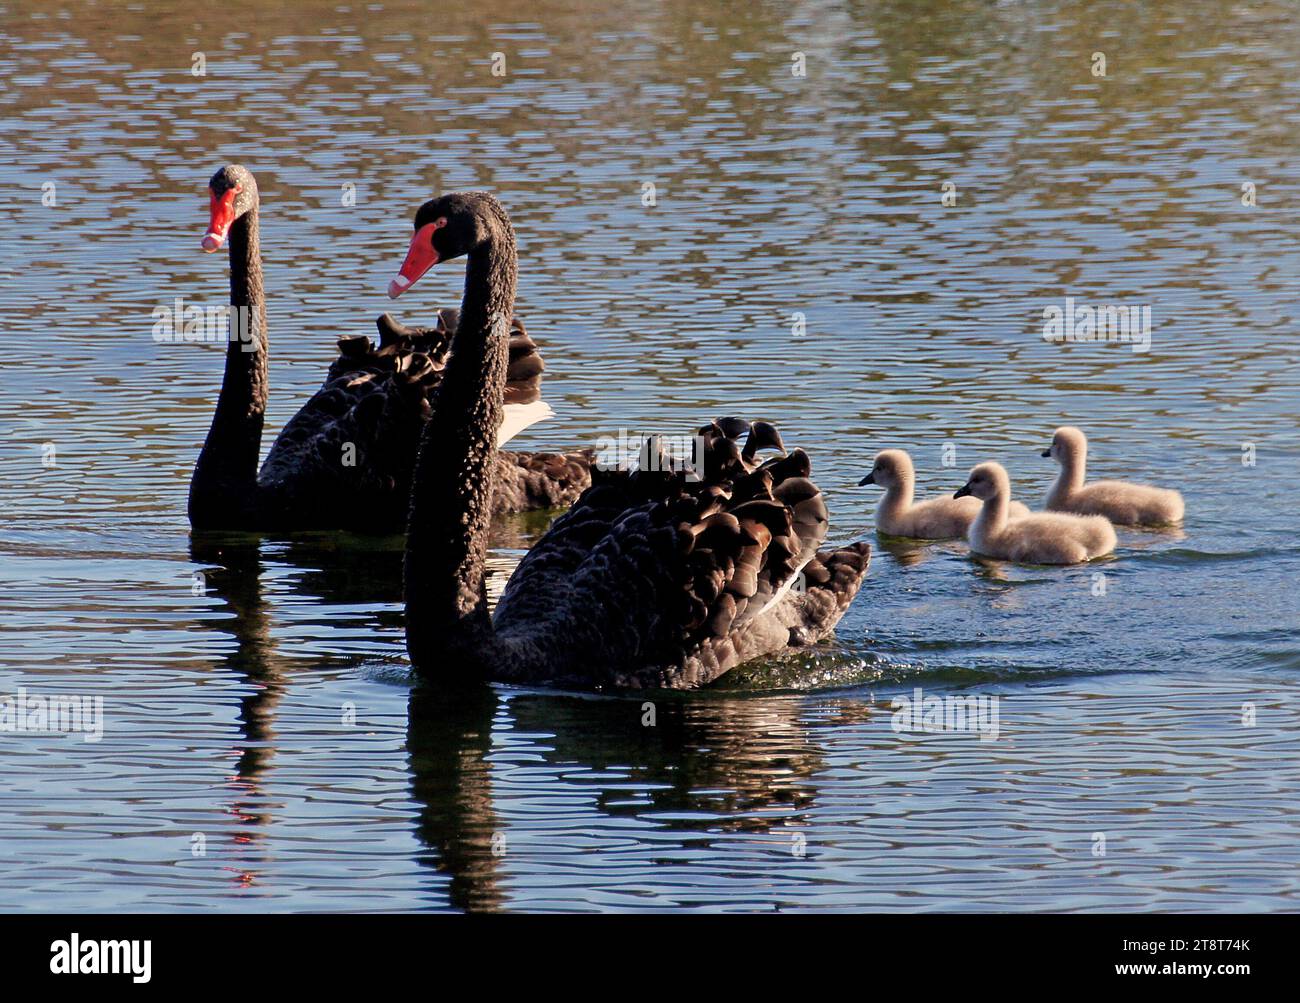 Black Swans. (Cygnus atratus), A large black swan, usually seen floating on water. When the wings are lifted, or when flying, pure white flight feathers are visible, which are black-tipped in immature birds. The bill is a bright red with a terminal white band, the eyes are red, and the legs are dark grey. Both sexes are alike, but the female is noticeably smaller than the male. Cygnets are grey with a black bill, and newly-fledged young are dull greyish-brown with a brown eye. On land swans walk slowly and are ungainly. Stock Photo